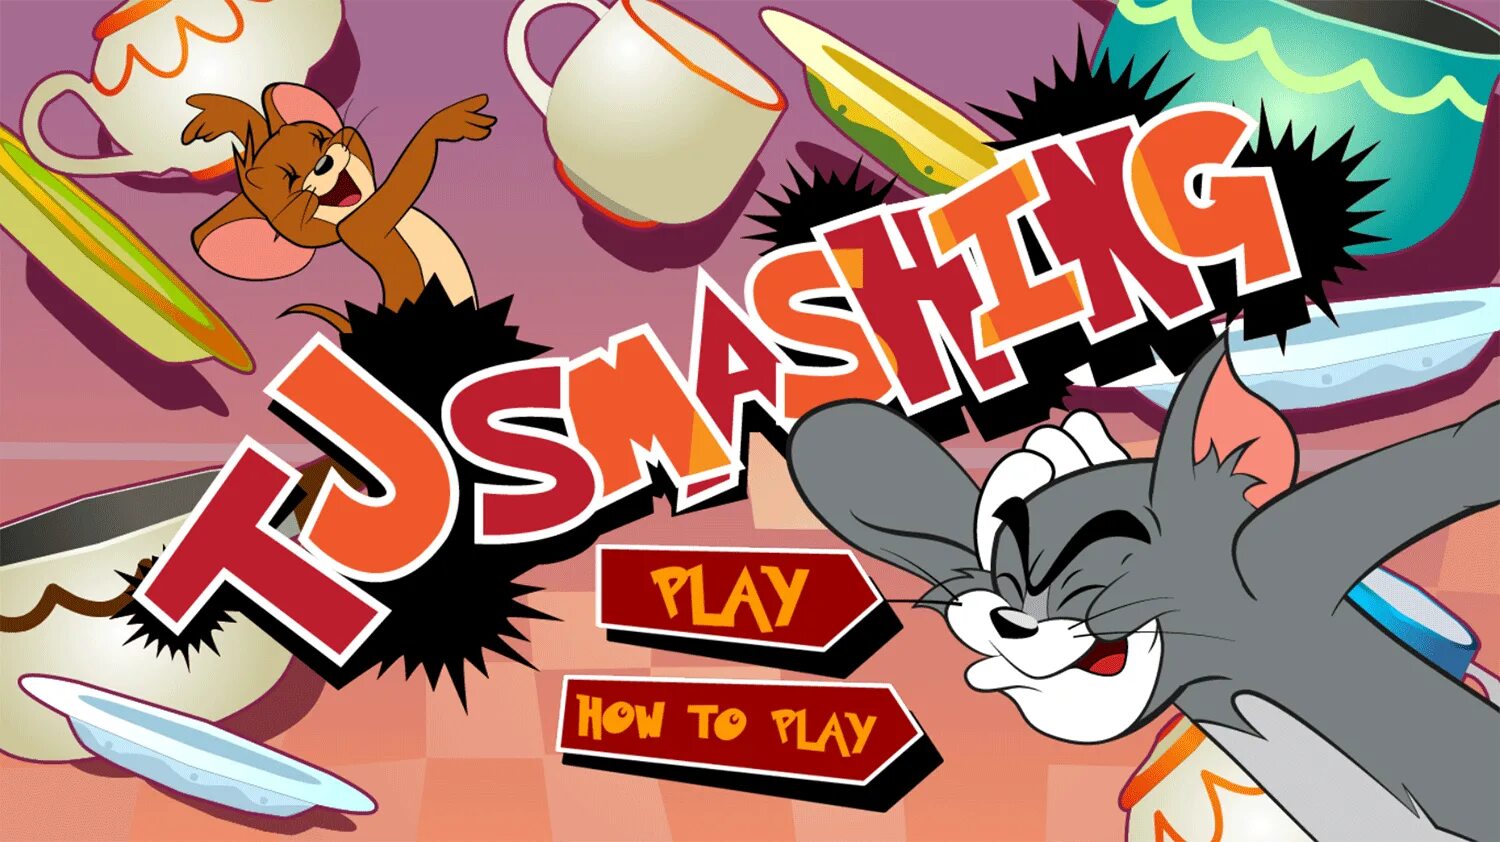 Tom and Jerry игра. Boomerang Tom and Jerry игра. Игра том и Джерри бомберы. Том и Джерри драка игра. Tom and jerry игры